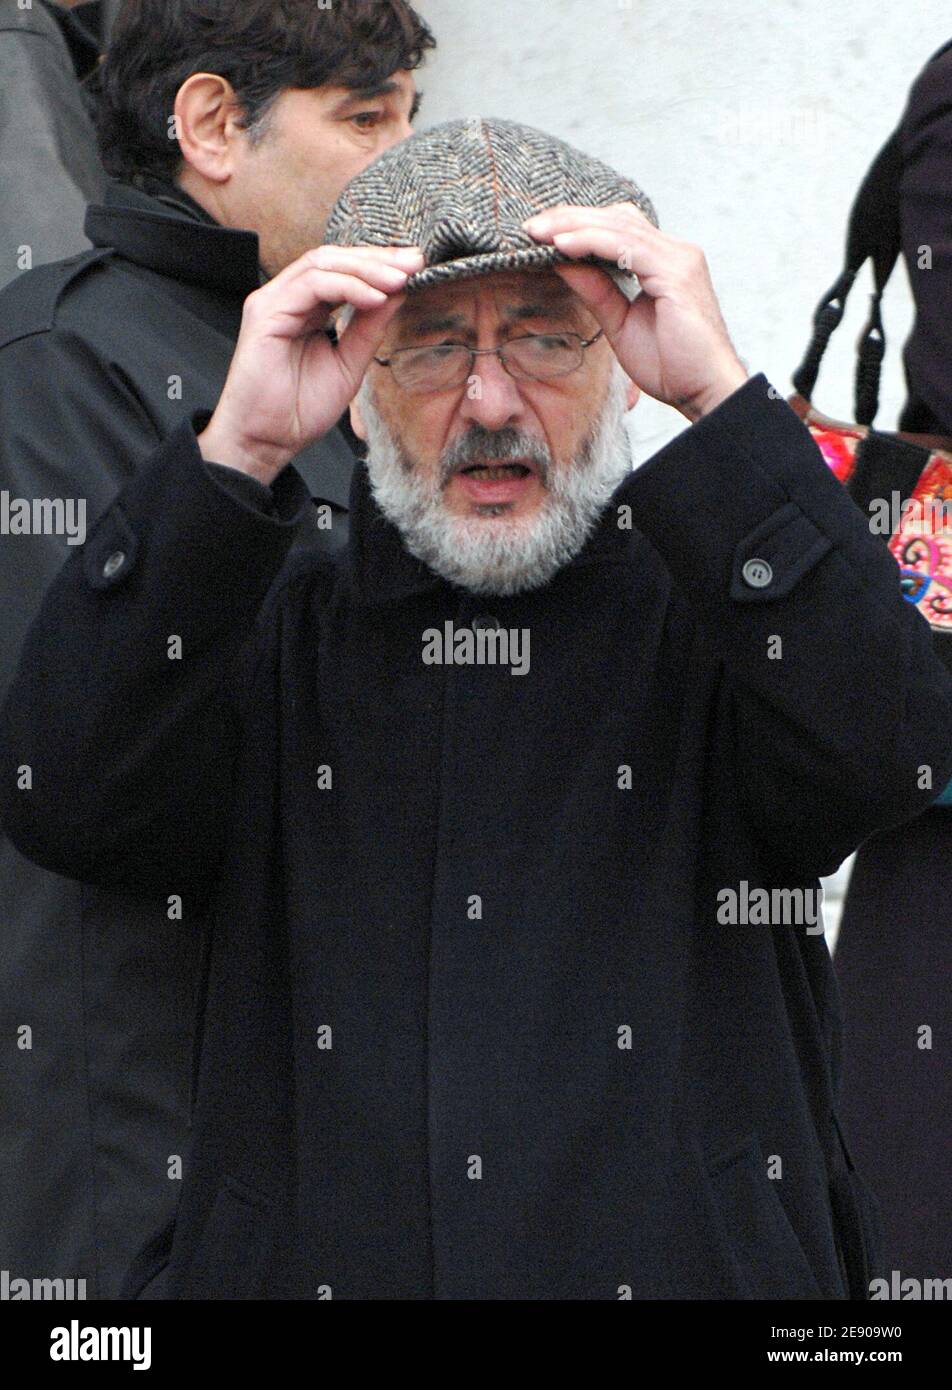 Director Bertrand Blier attends director Pierre Granier-Deferre's funeral held at the Pere-Lachaise cemetery crematorium in Paris, France, on November 23, 2007. Photo by Khayat-Mousse/ABACAPRESS.COM Stock Photo